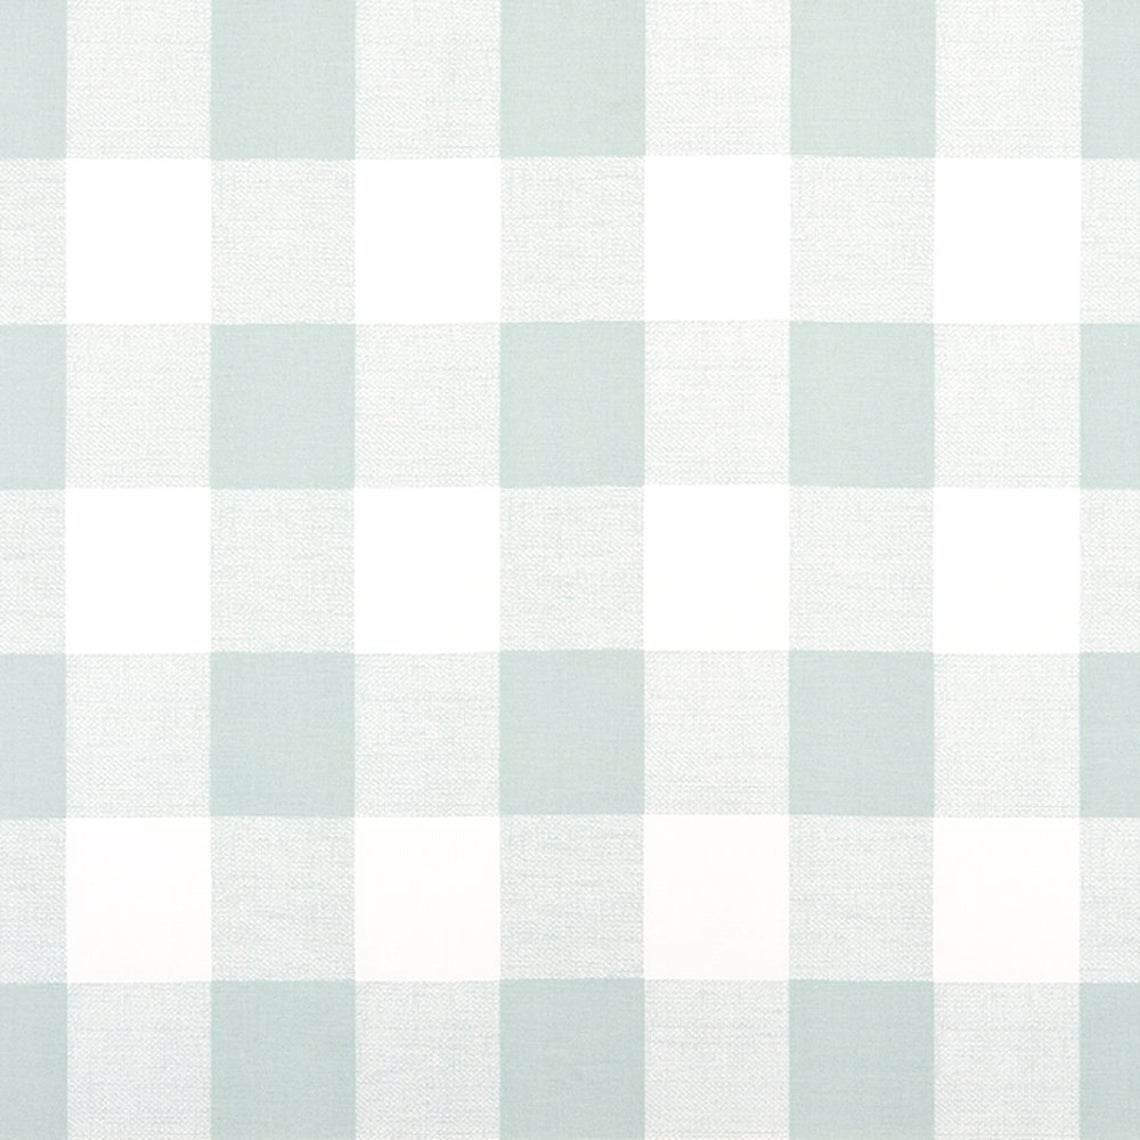 gathered bedskirt in anderson snowy pale blue-green buffalo check plaid